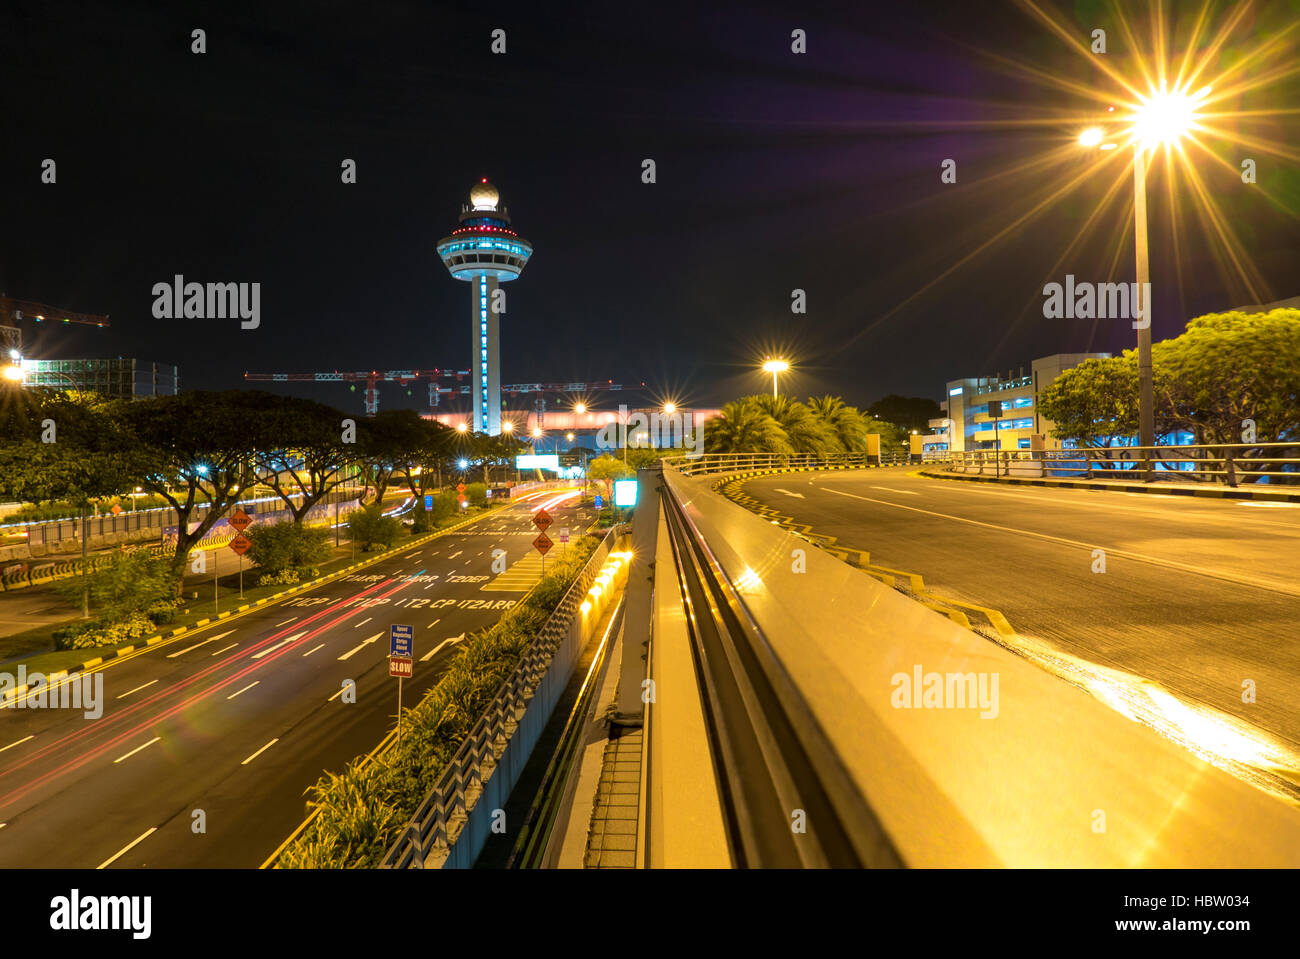 Singapore Changi Airport at night with air traffic control tower Stock Photo